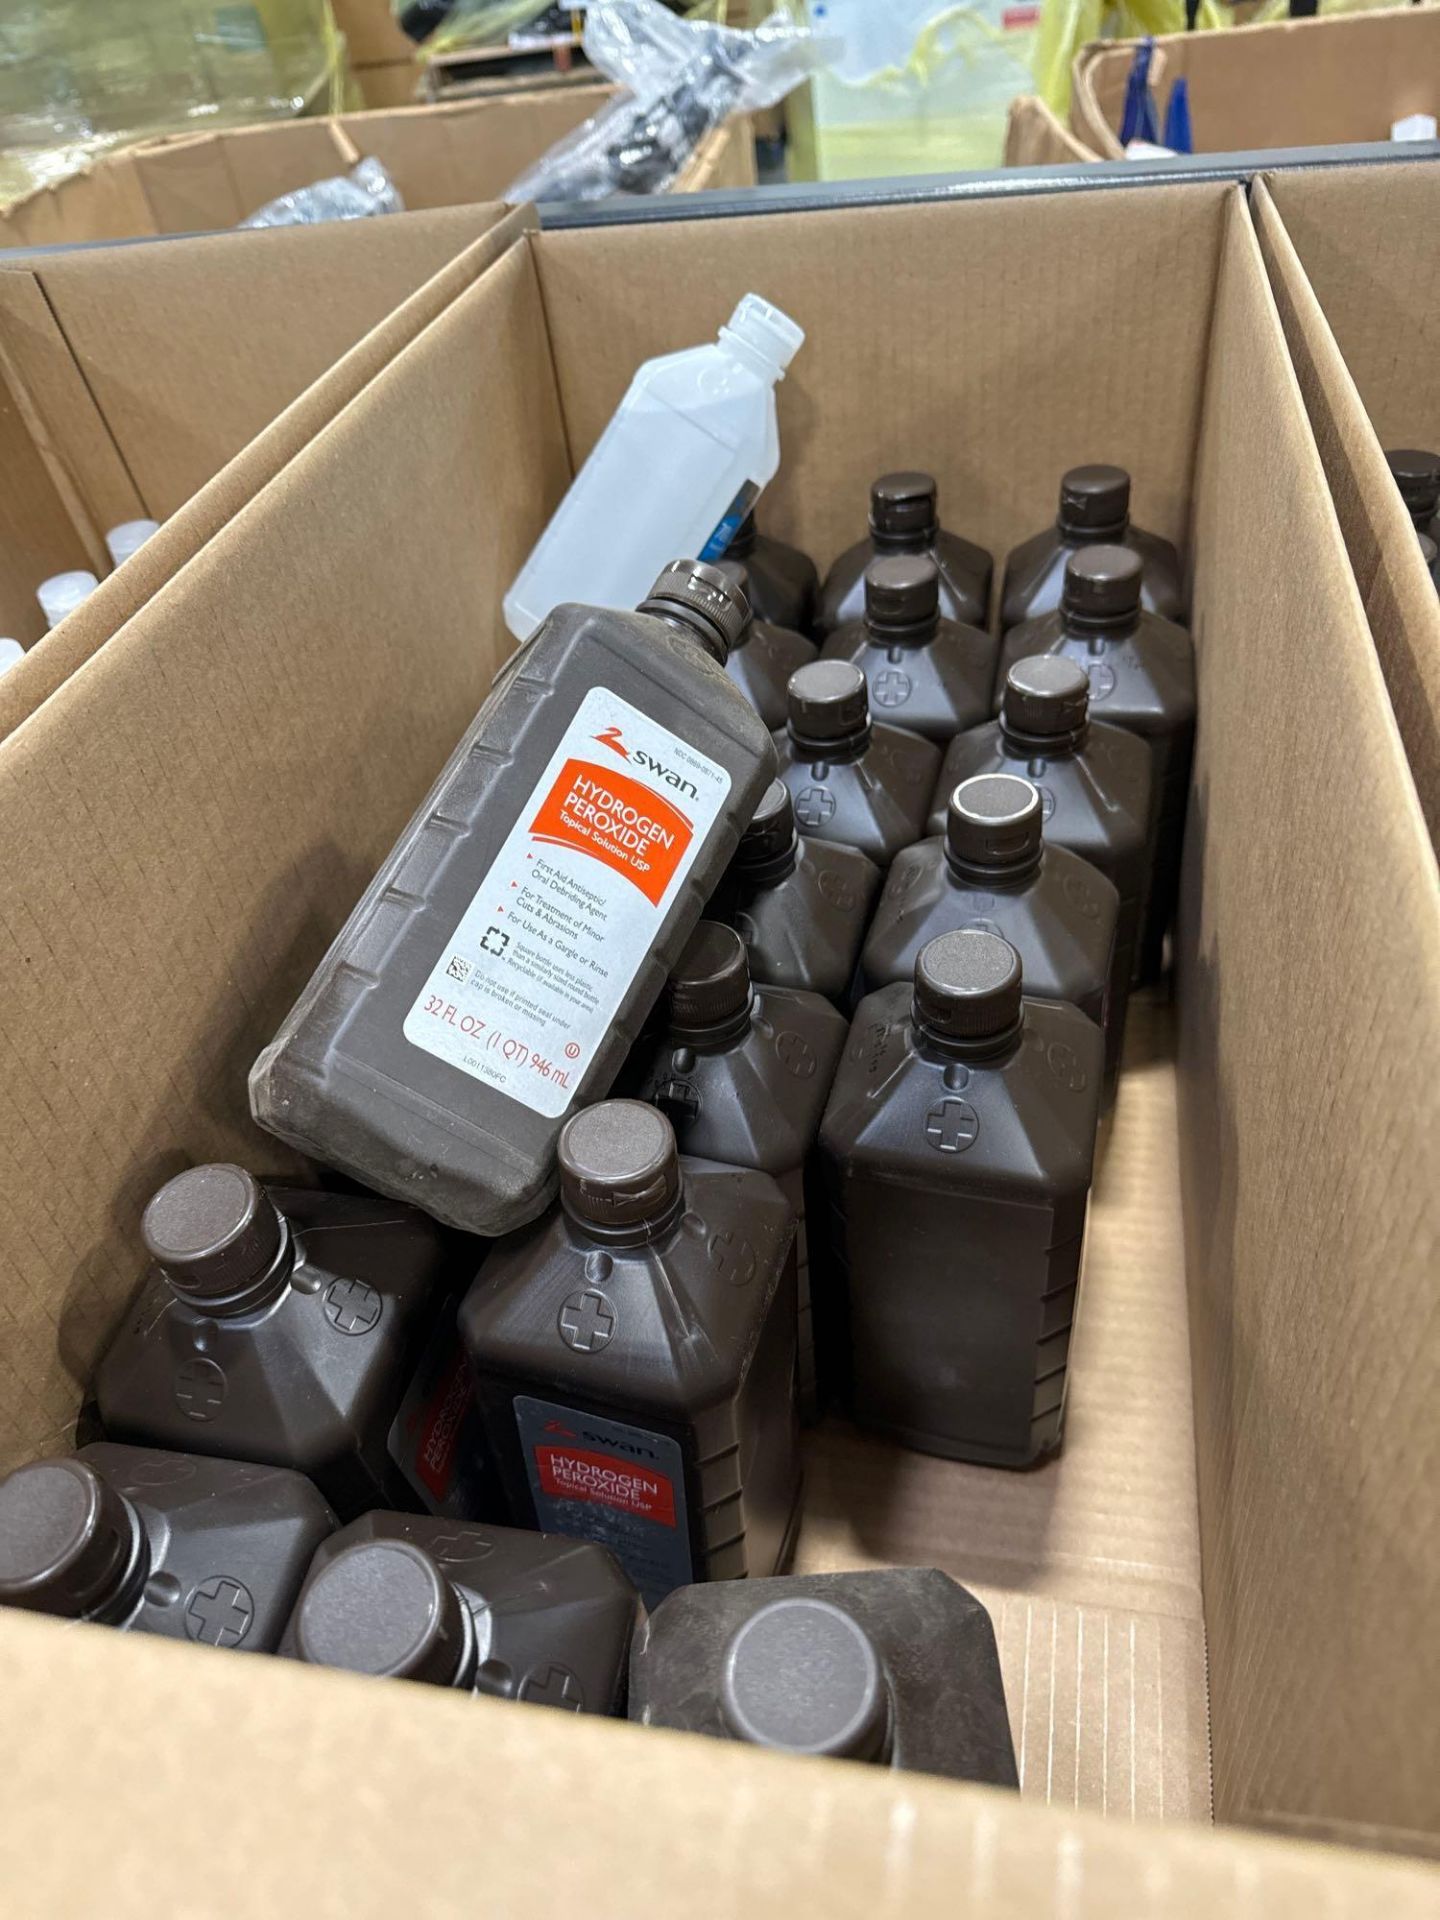 Boxes of Hydrogen Peroxide & 70% Isopropyl Alcohol - Image 5 of 6